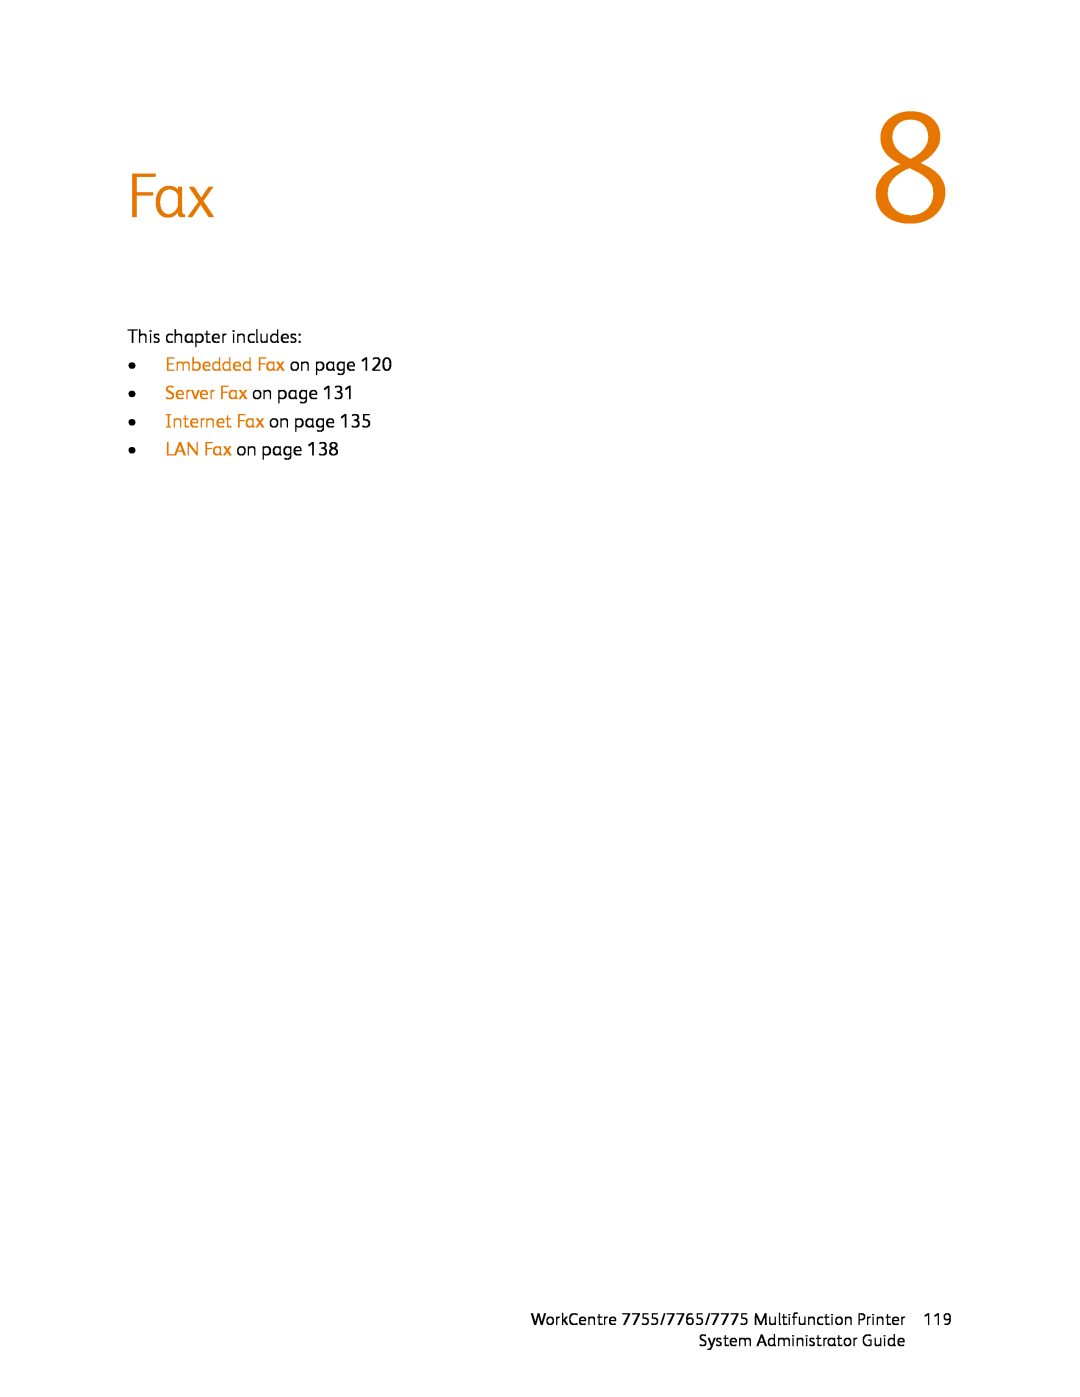 Xerox 7775 Fax8, This chapter includes, •Embedded Fax on page •Server Fax on page, •Internet Fax on page, •LAN Fax on page 